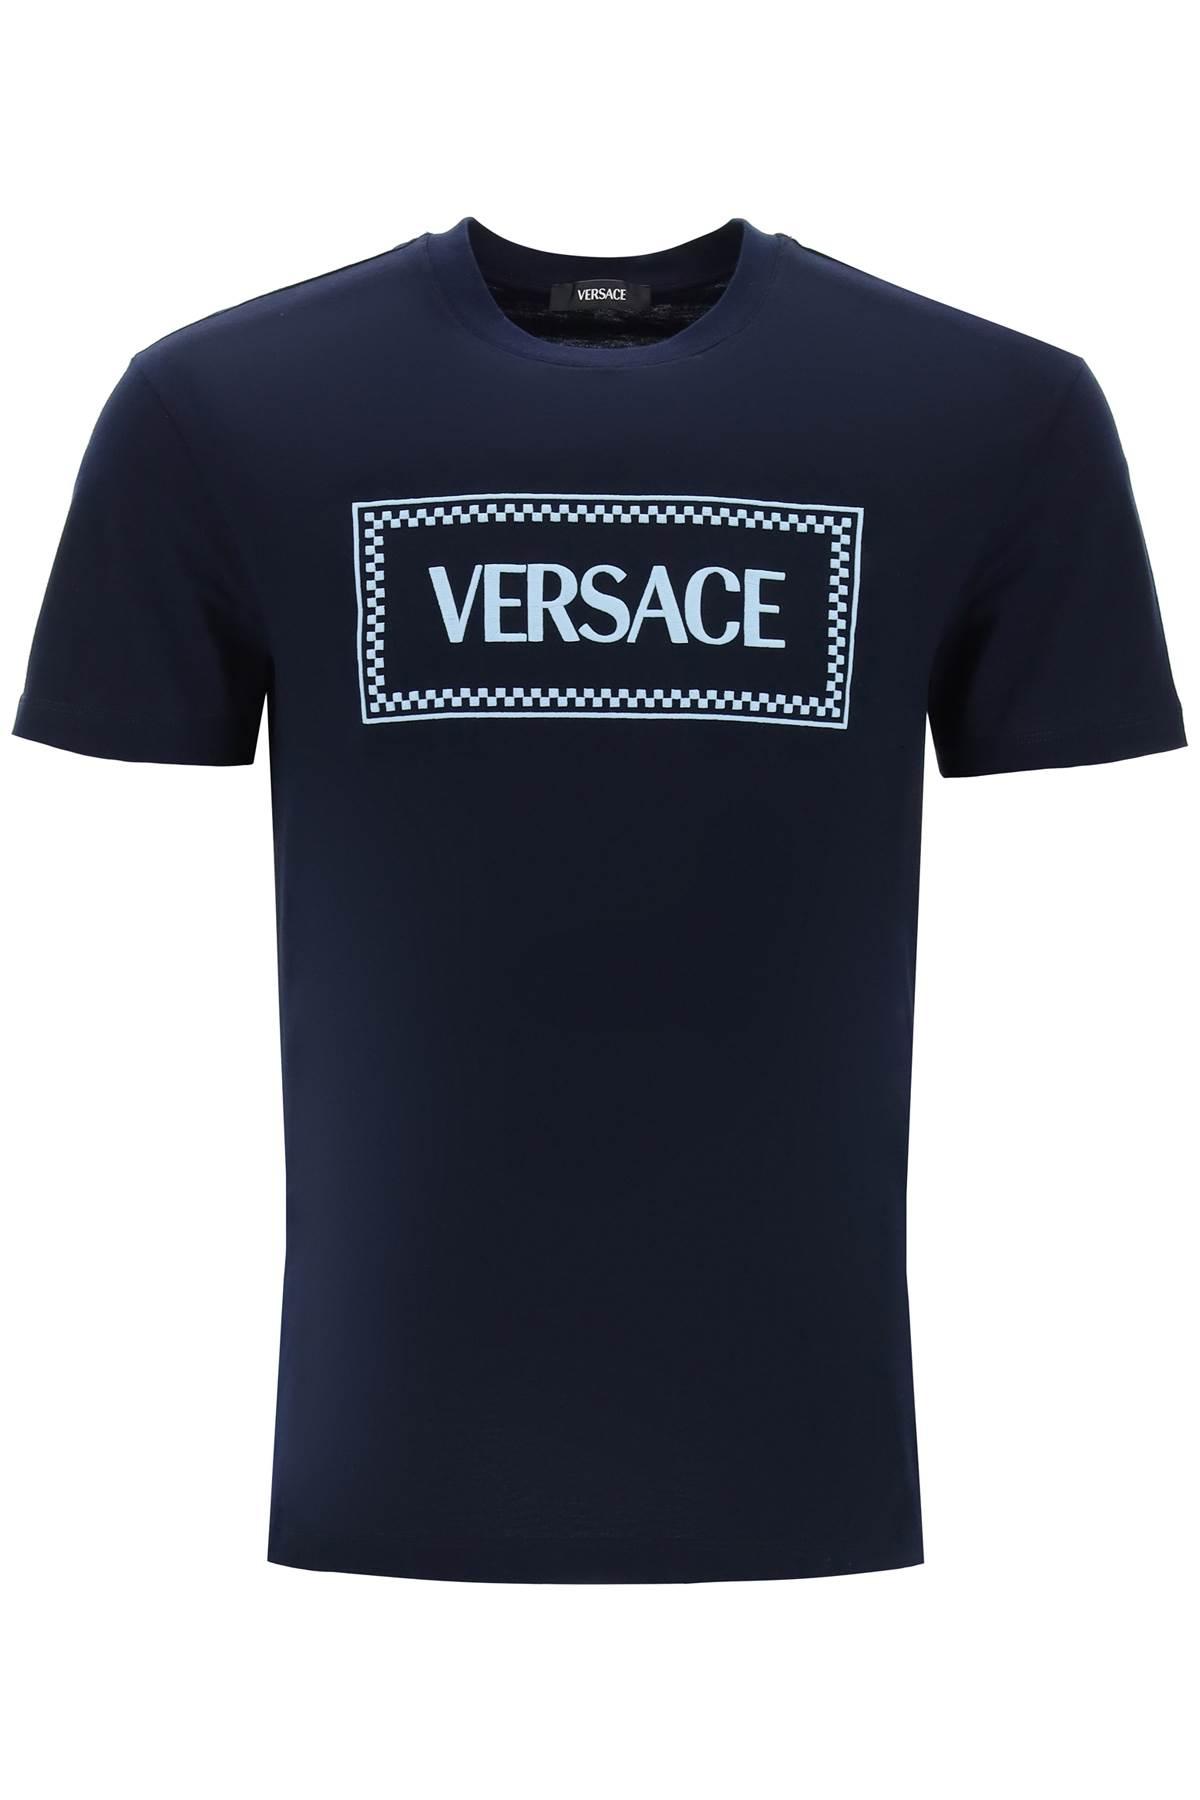 VERSACE Embroidered logo T-shirt